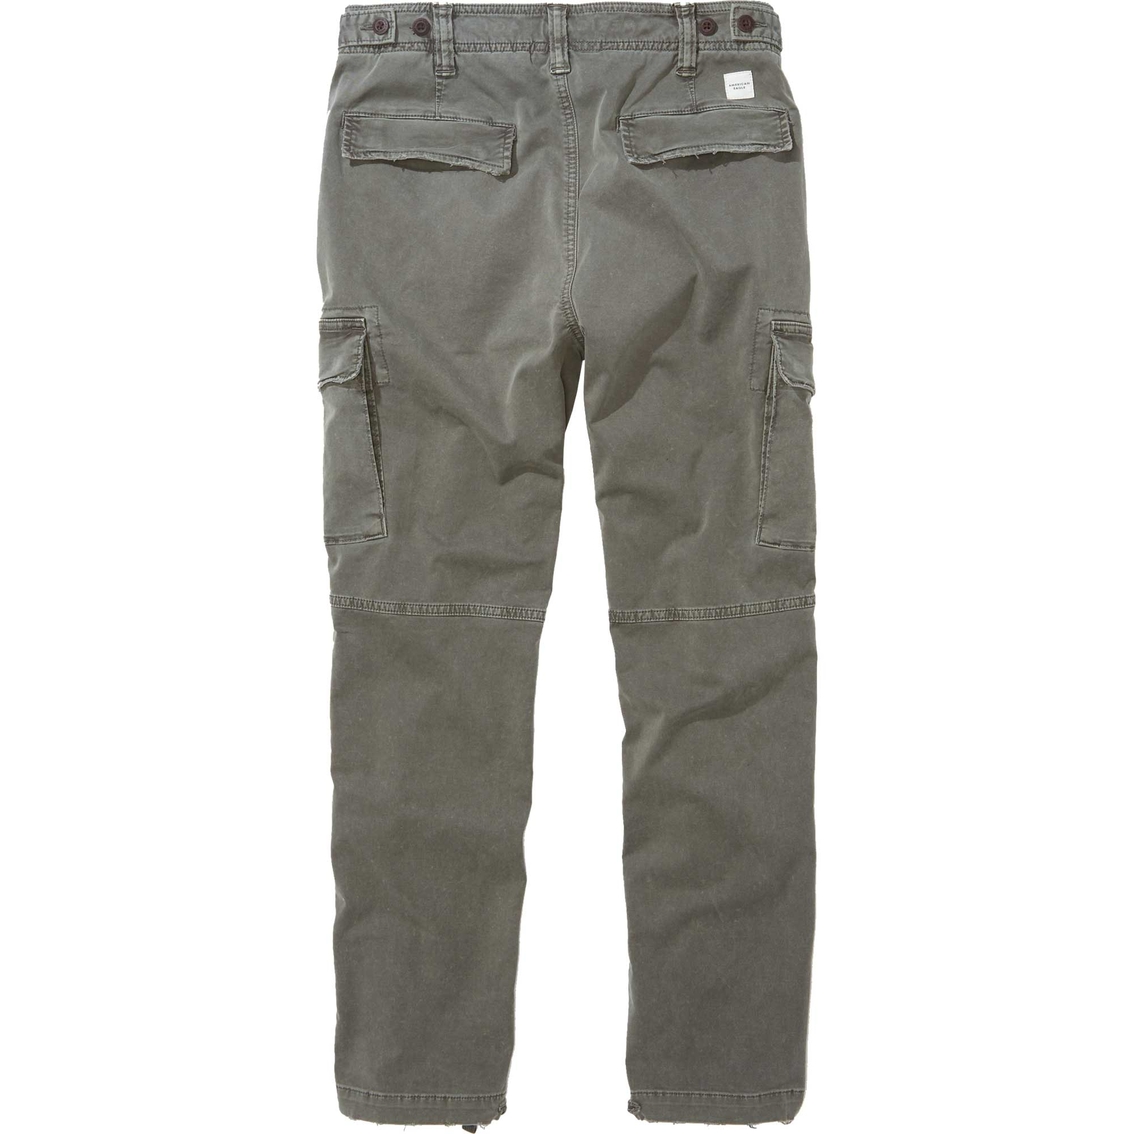 American Eagle Flex Slim Lived In Cargo Pants - Image 5 of 5